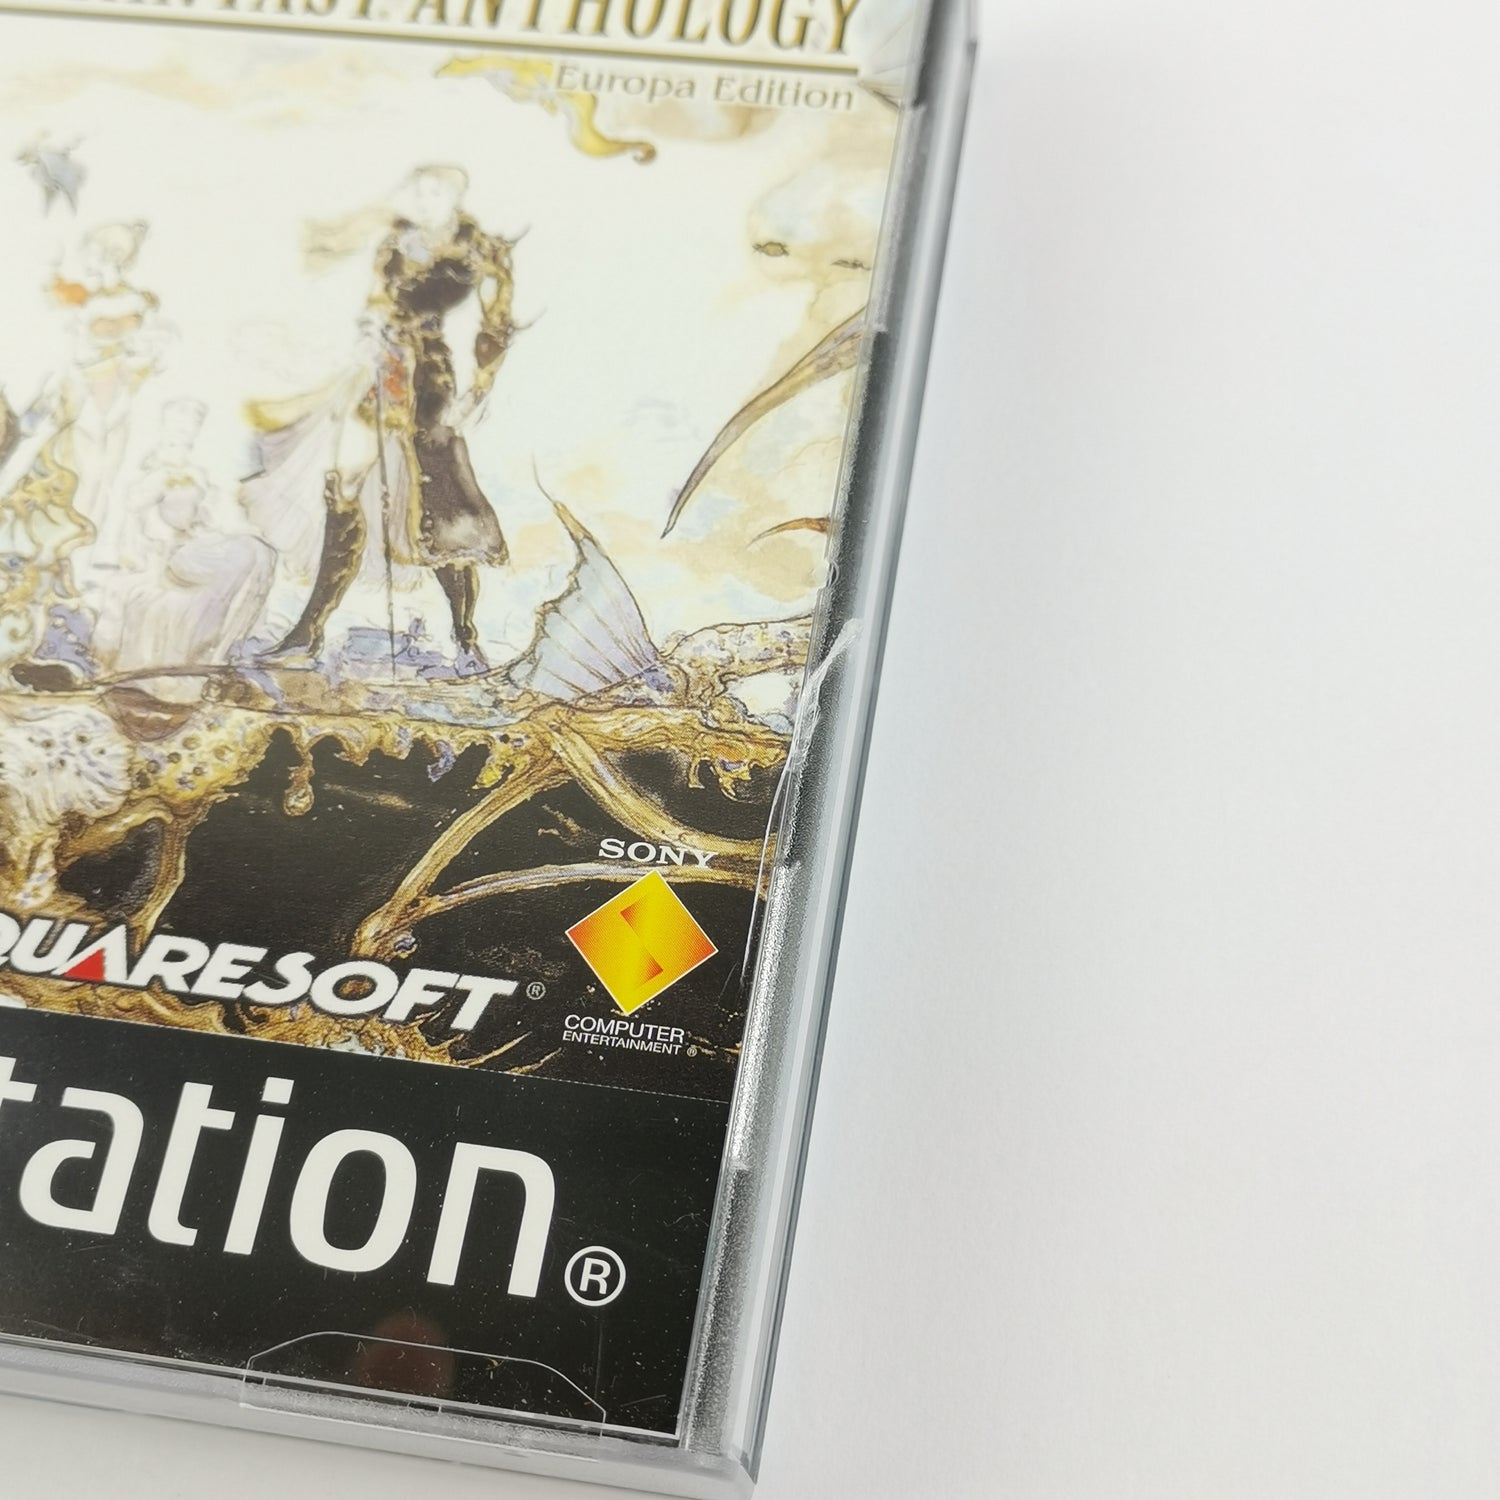 Sony Playstation 1 Game: Final Fantasy Anthology - OVP & Instructions PAL | PS1